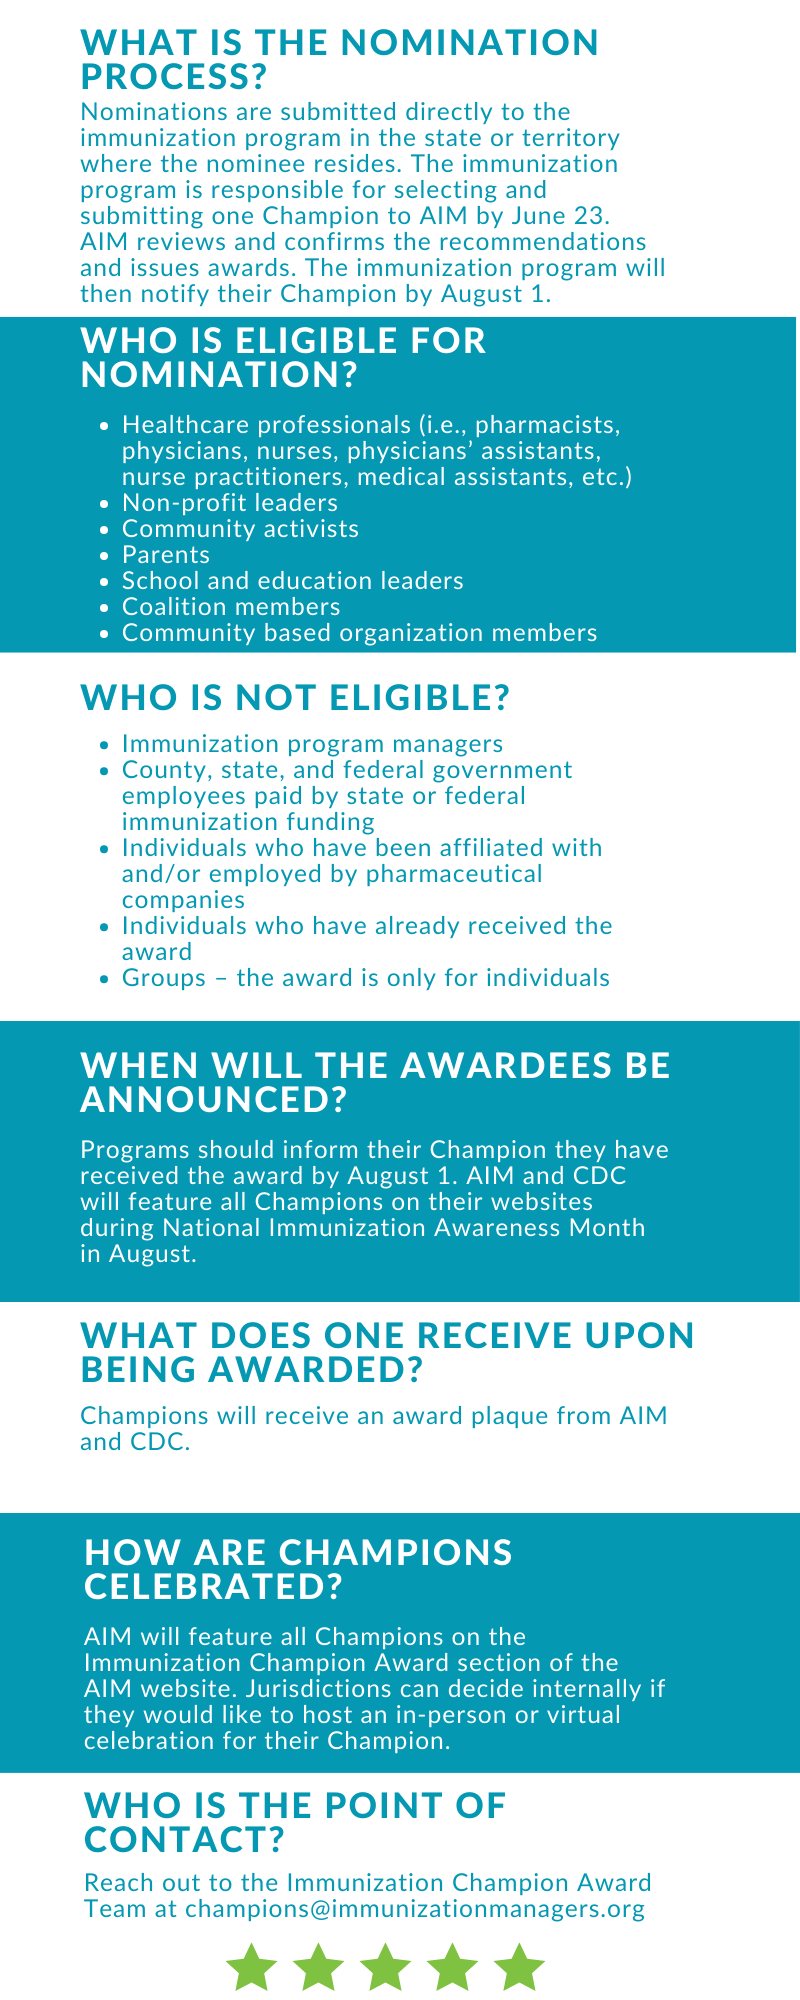 6. What is the nomination process? Nominations are submitted directly to the immunization program in the state or territory where the nominee resides. The immunization program is responsible for selecting and submitting one Champion to AIM by June 23. AIM reviews and confirms the recommendations and issues awards. The immunization program will then notify their Champion by August 1. 7. Who is eligible for nomination? Healthcare professionals (i.e., pharmacists, physicians, nurses, physicians’ assistants, nurse practitioners, medical assistants, etc.), non-profit leaders, community activists, parents, school and education leaders. coalition members, and community-based organization members. 8. Who is NOT eligible? Immunization program managers, county, state, and federal government employees paid by state or federal immunization funding, individuals who have been affiliated with and/or employed by pharmaceutical companies, individuals who have already received the award, and groups – the award is only for individuals. 9. When will the awardees be announced? Programs should inform their Champion they have received the award by August 1. AIM and CDC will feature all Champions on their websites during National Immunization Awareness Month in August. 10. What does one receive upon being awarded? Champions will receive an award plaque from AIM and CDC. 11. How are Champions celebrated? AIM will feature all Champions on the Immunization Champion Award section of the AIM website. Jurisdictions can decide internally if they would like to host an in-person or virtual celebration for their Champion. 12. Who is the point of contact? Reach out to the Immunization Champion Award Team at champions@immunizationmanagers.org.